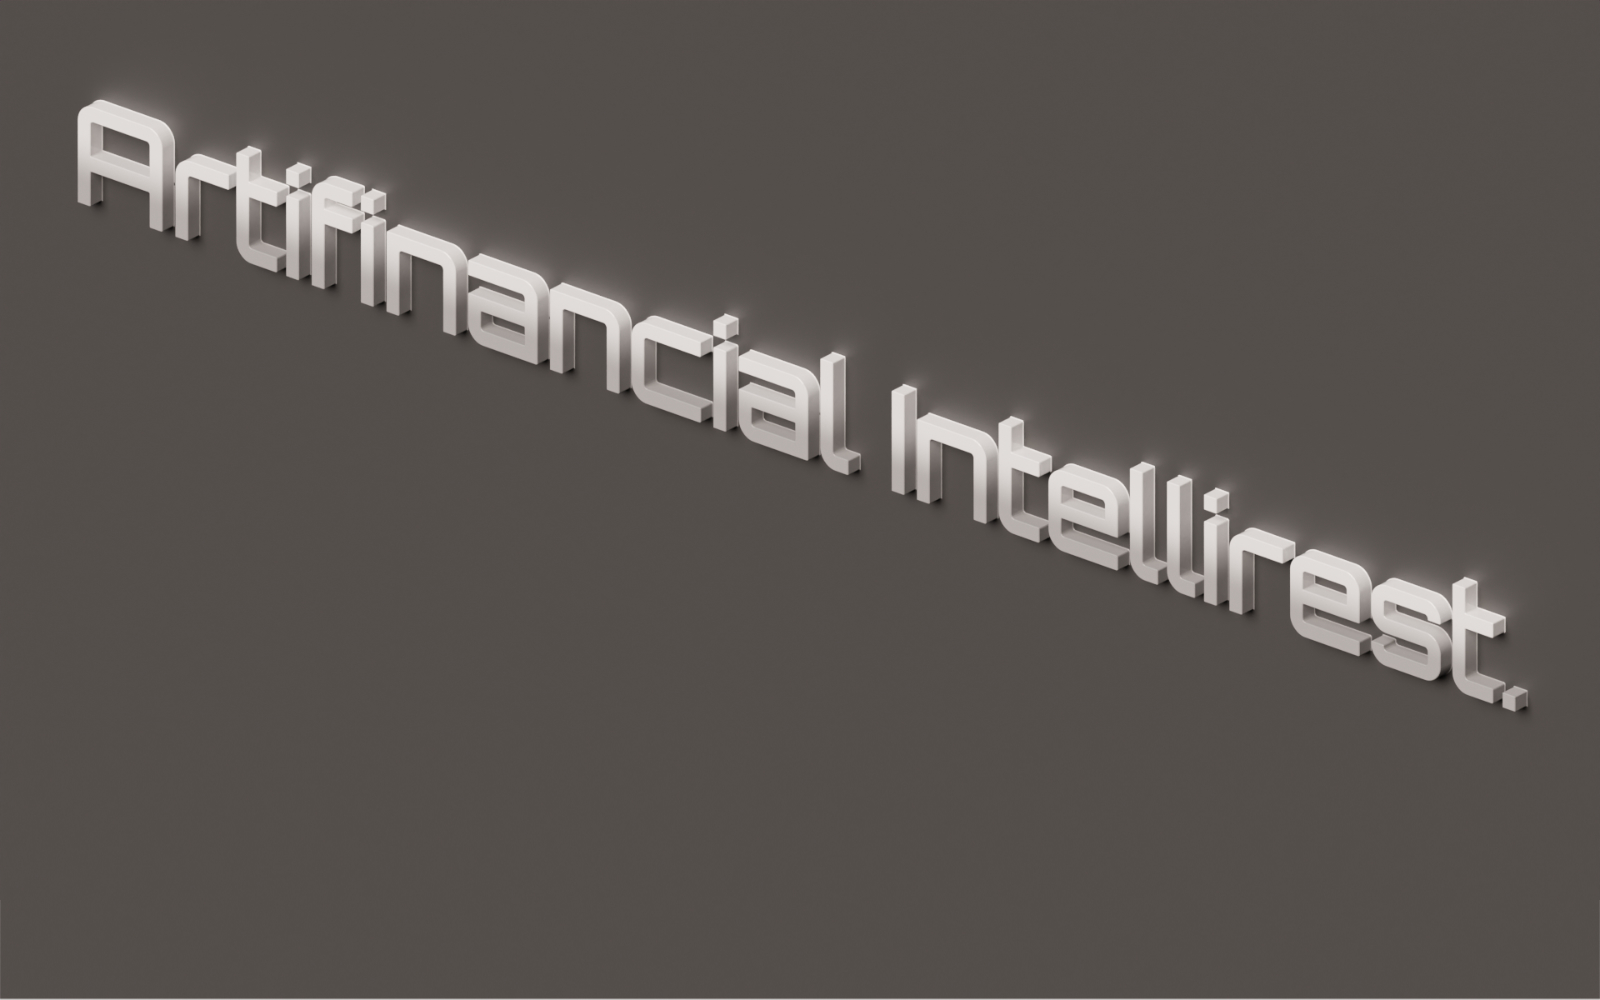 3D Art of typography saying \'artifinancial intellirest\' as a parody to contemporary technology